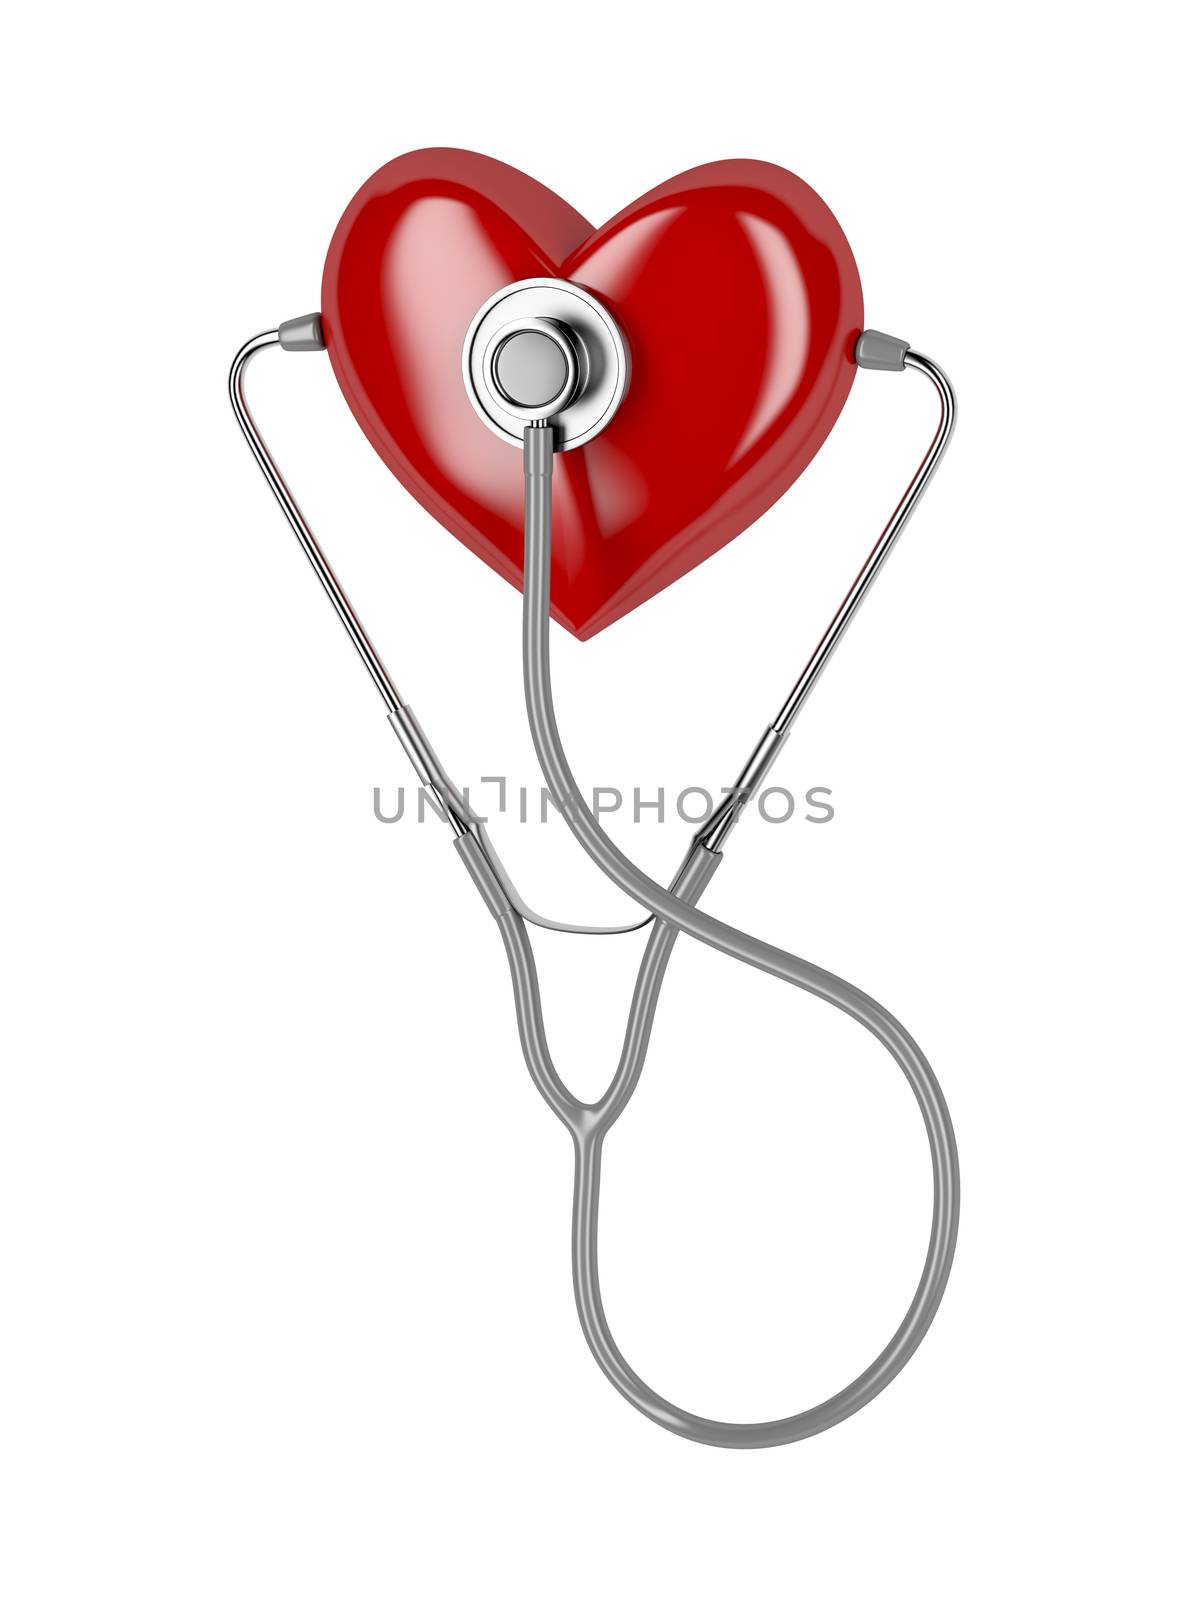 Red heart and a stethoscope by magraphics